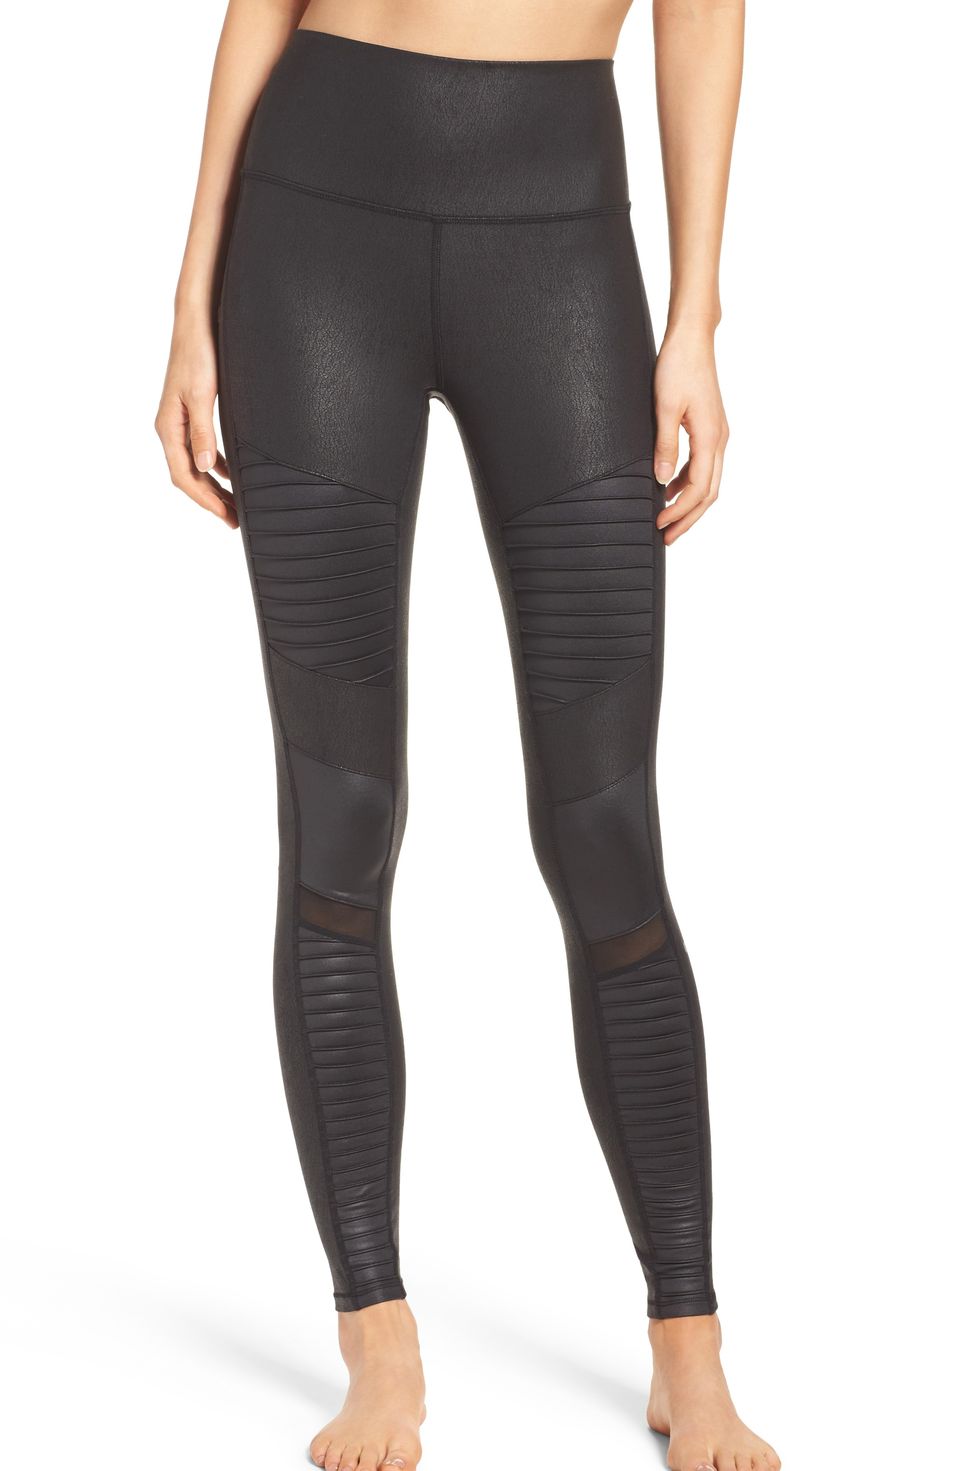 The Best Leggings For You, Based On Your Zodiac Sign